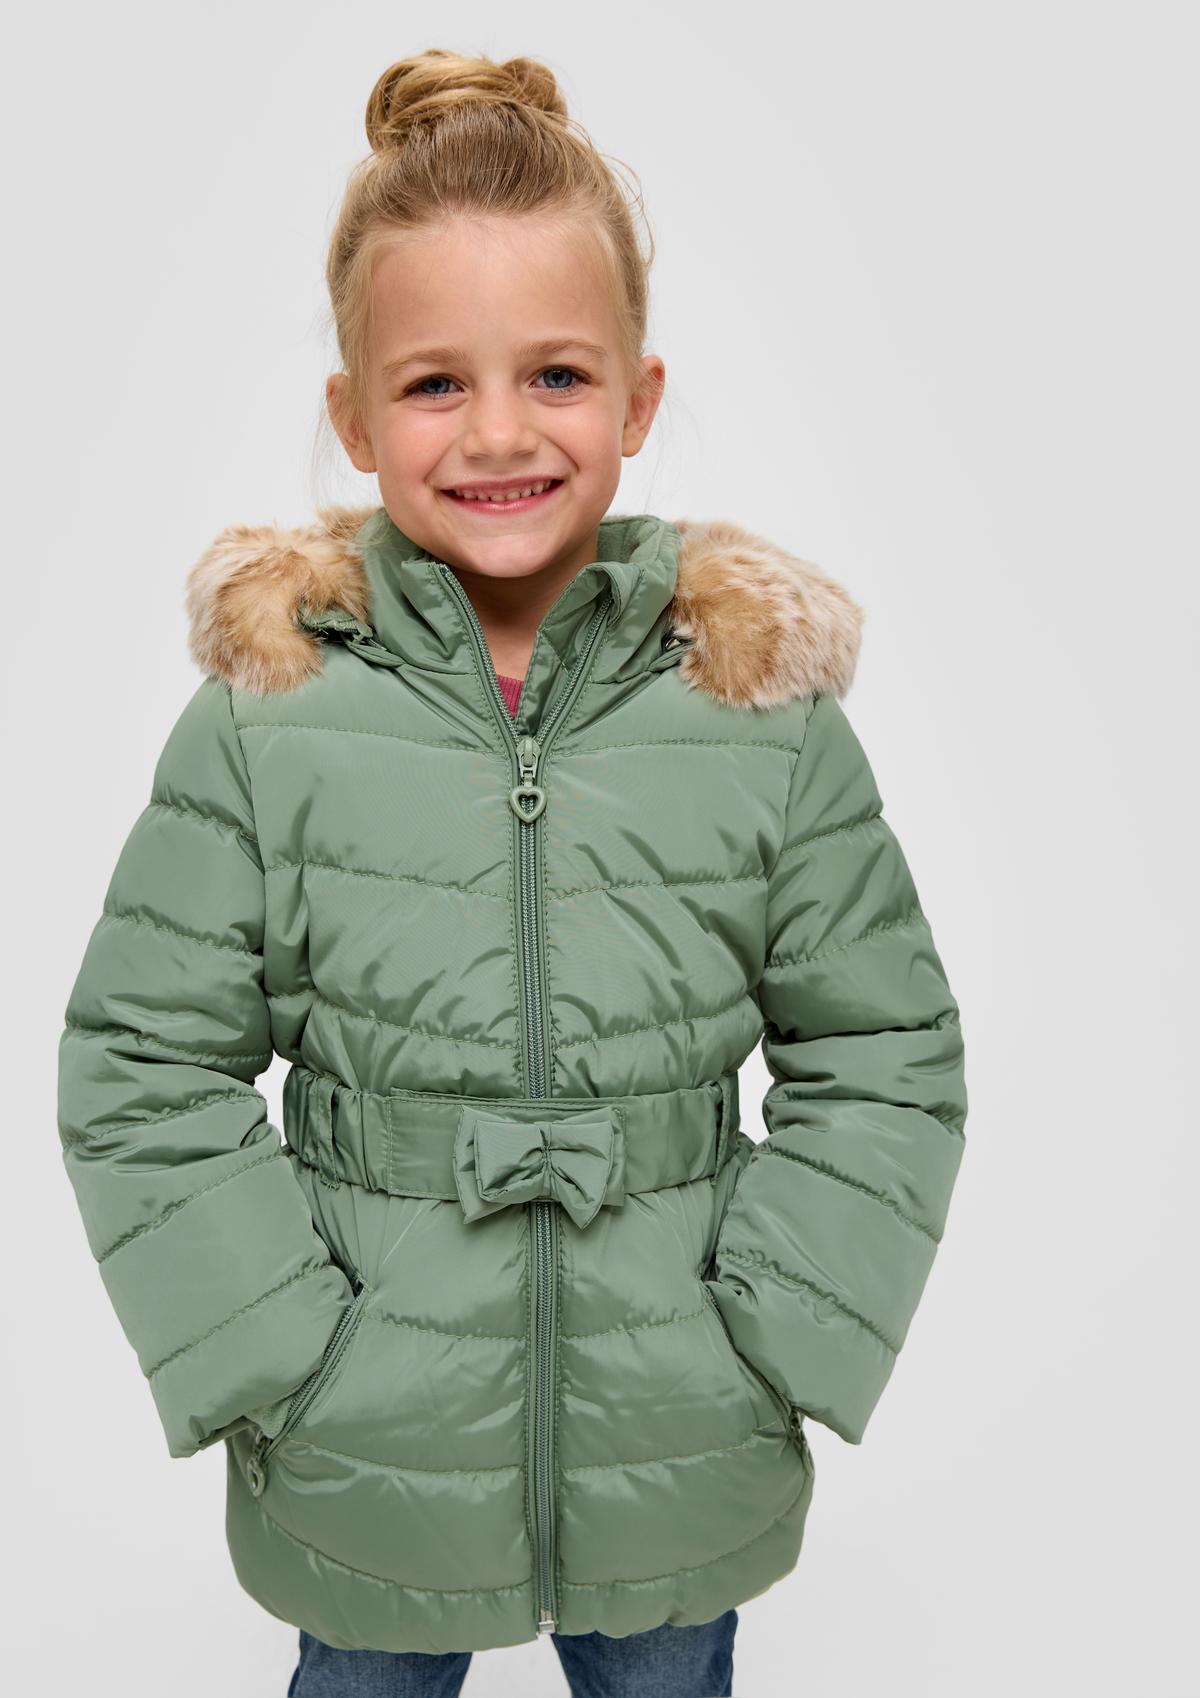 Discover jackets and body warmers for girls online